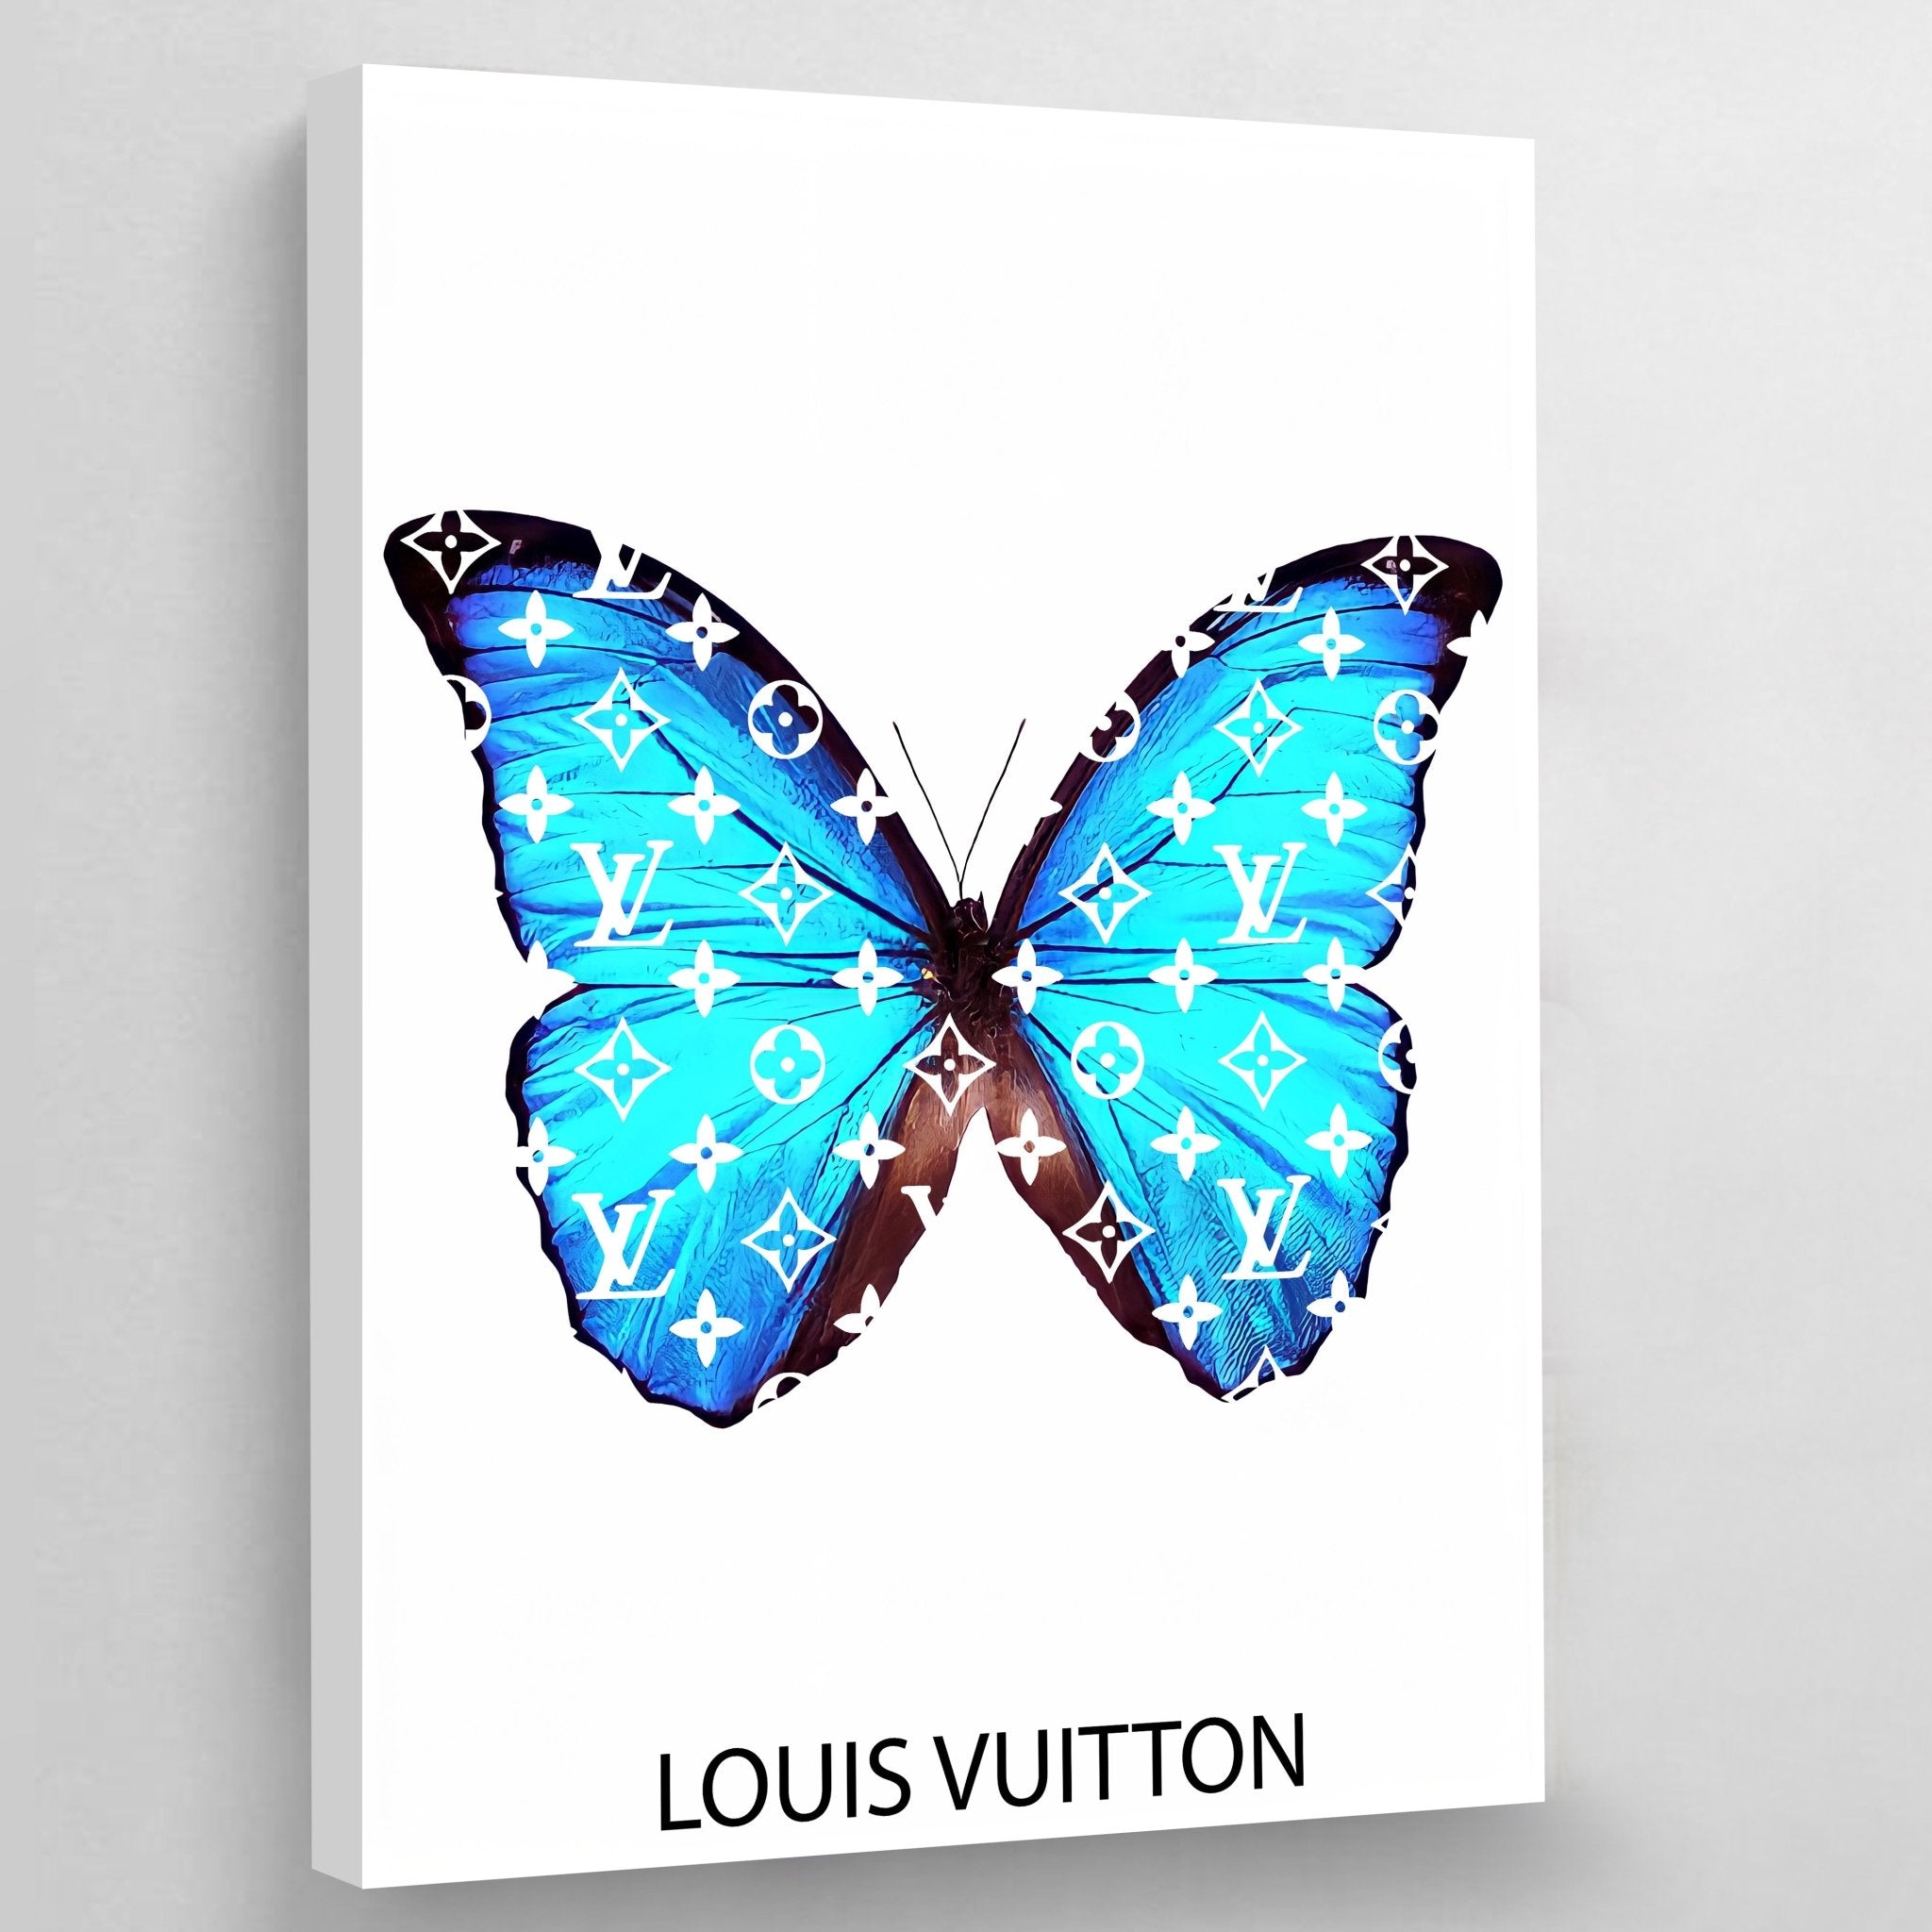 Louis Vuitton Store Sign Chic Fashion Wall Art Metal LV Designer Sign   Print and Proper